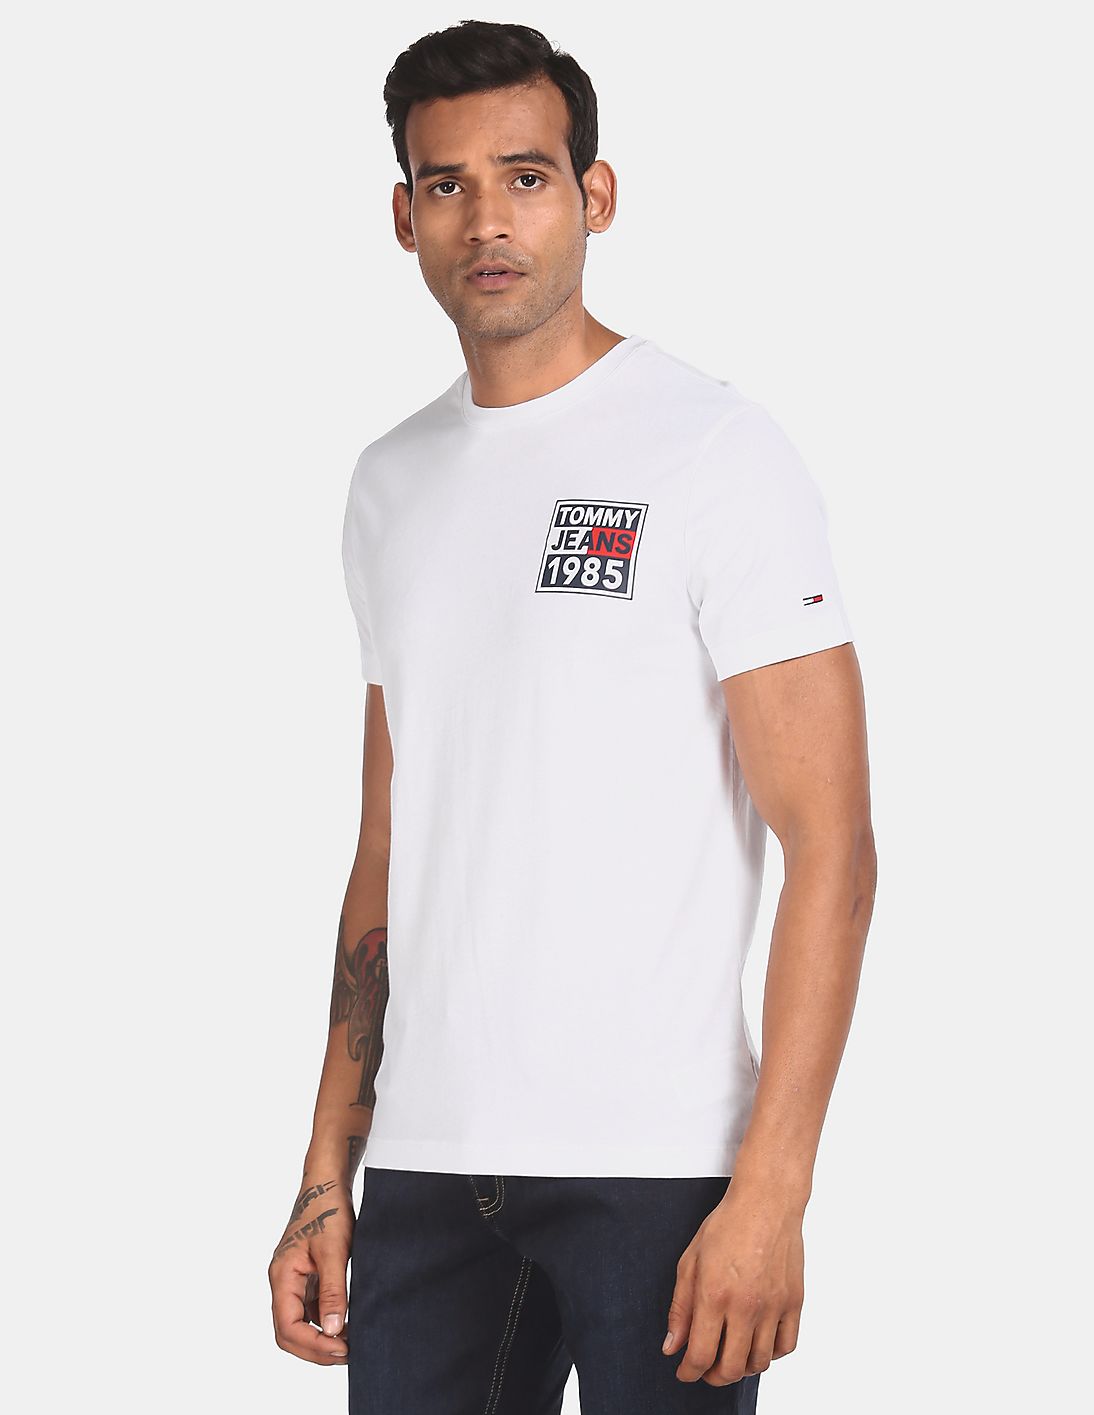 ÁO THUN TOMMY HILFIGER MEN WHITE COTTON FRONT AND BACK GRAPHIC PRINT T-SHIRT 6